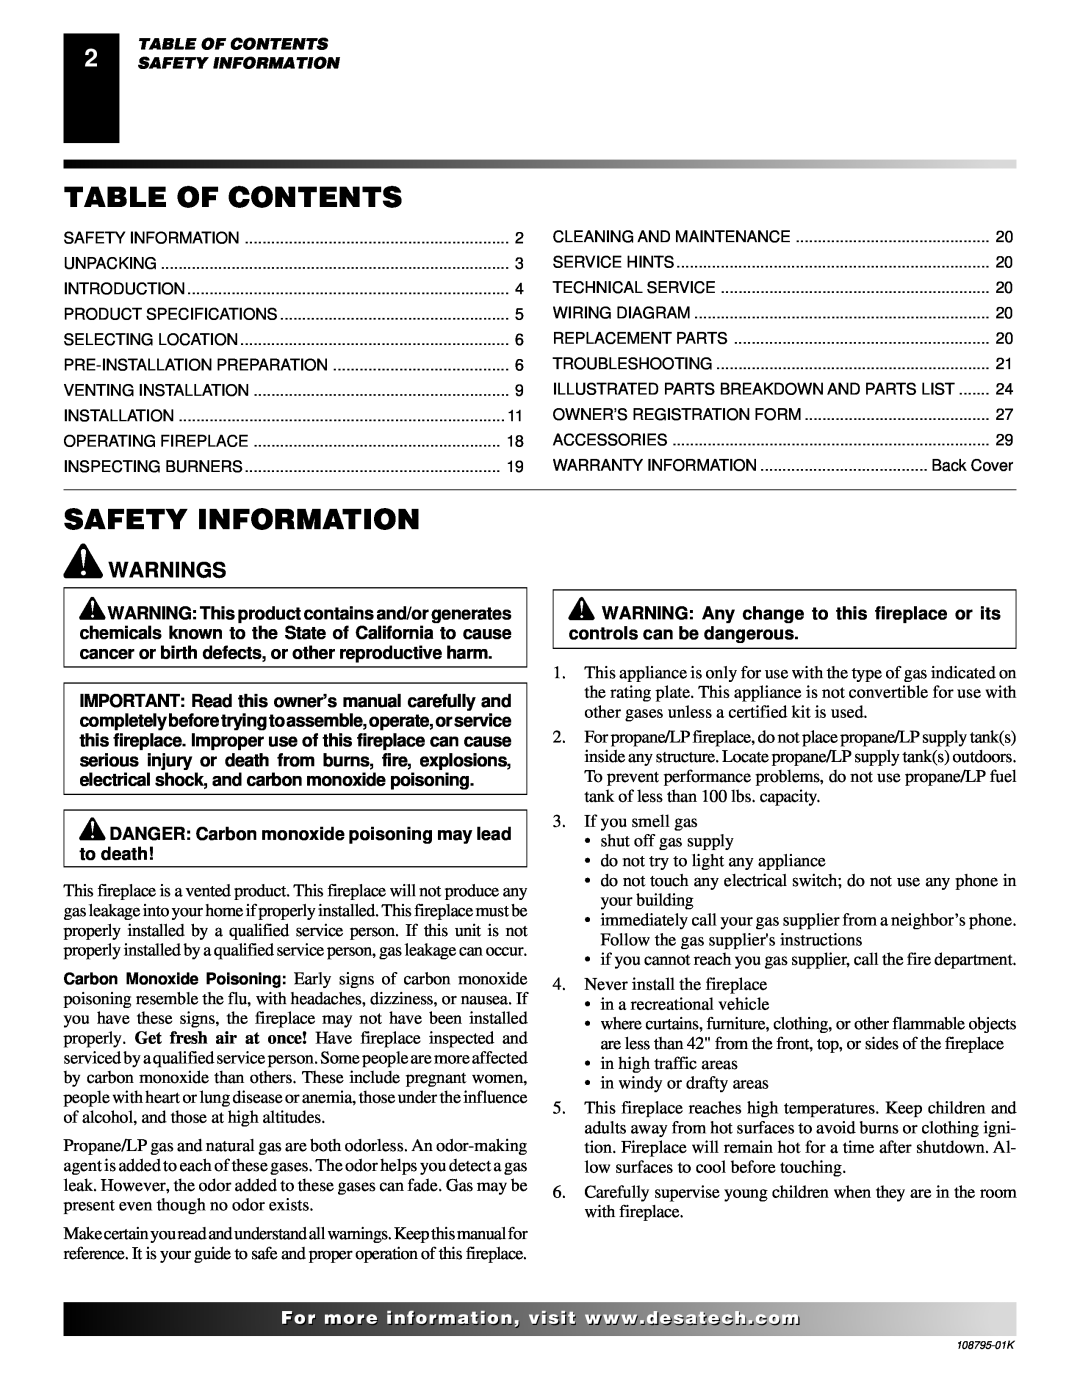 Desa AND VM42 installation manual Table Of Contents, Safety Information, Warnings 